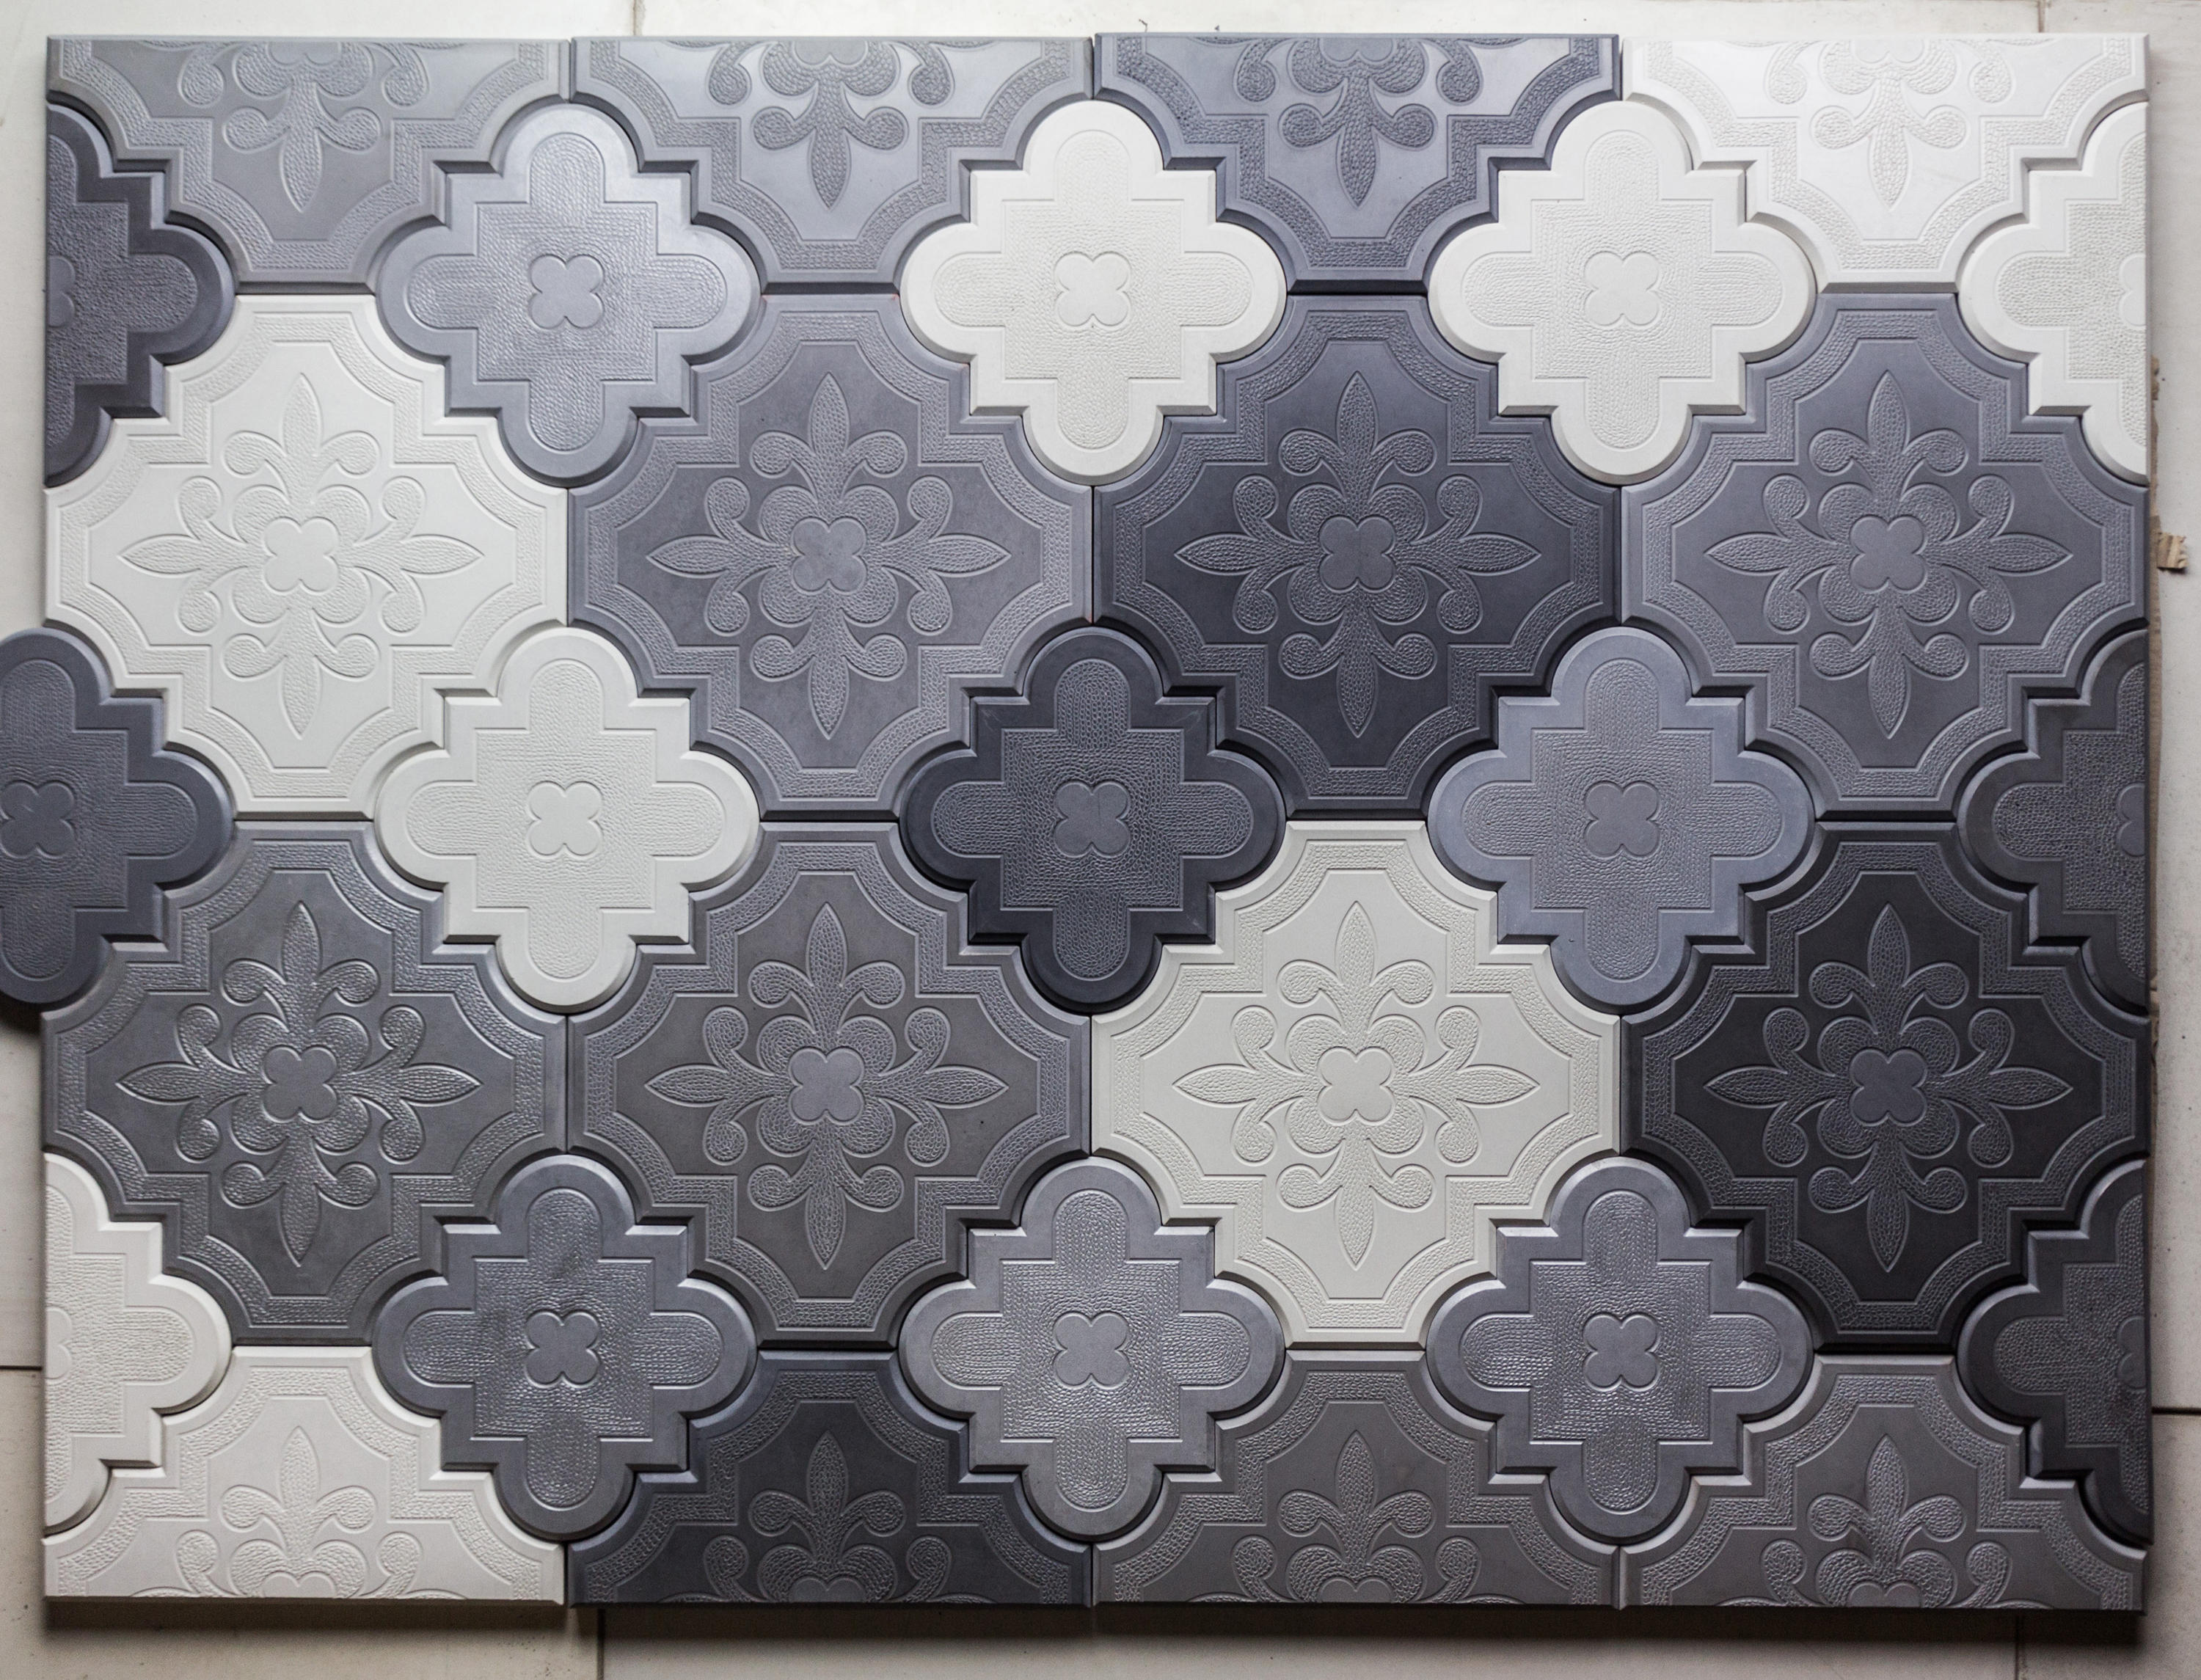 Flaster Concrete Tiles From Ivanka Architonic